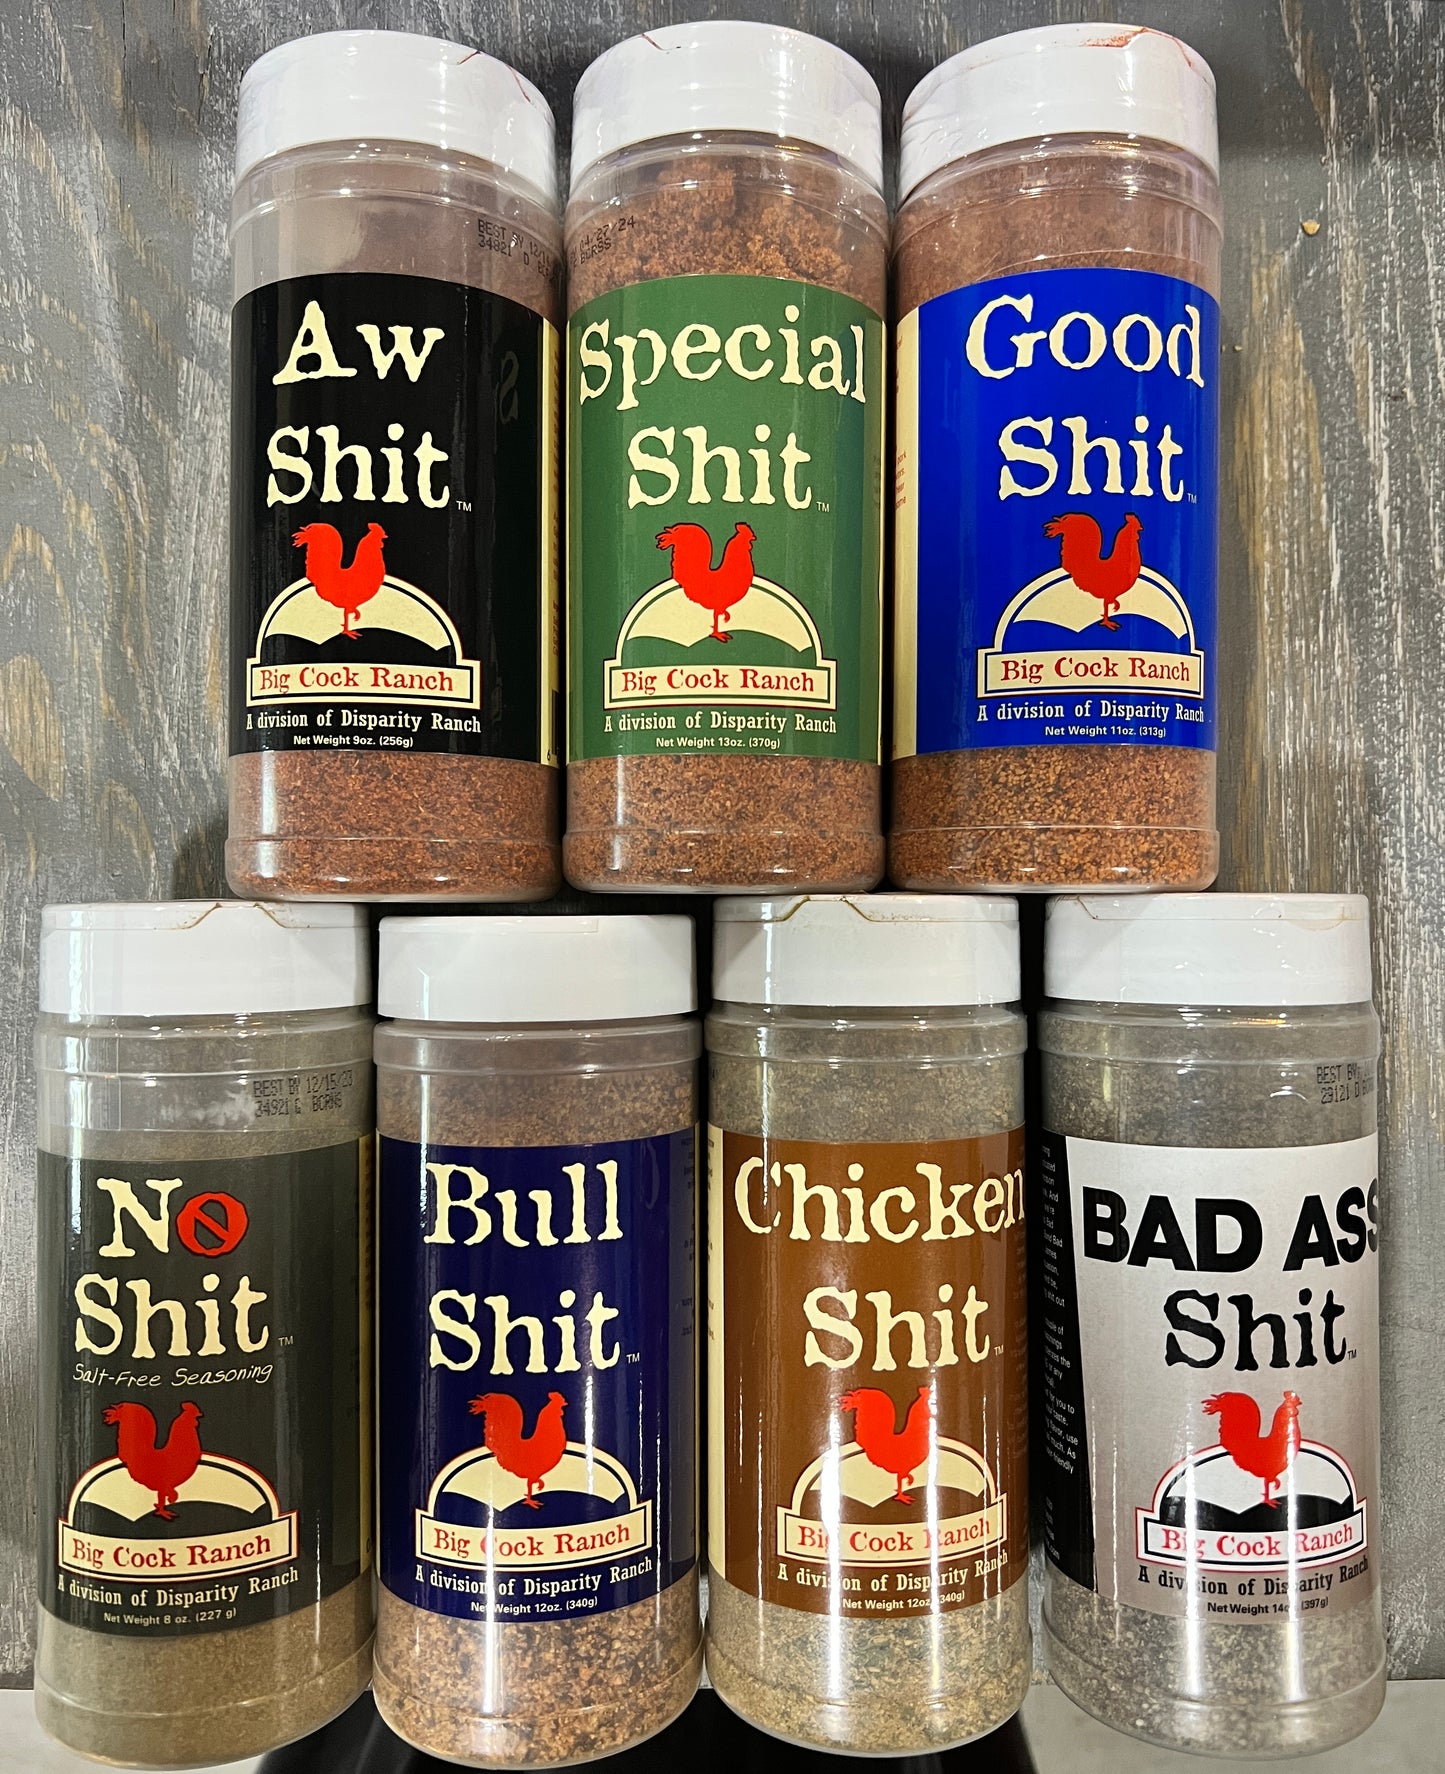 Special Shit Seasoning - $15.95 : , Unique Gifts and Fun  Products by FunSlurp